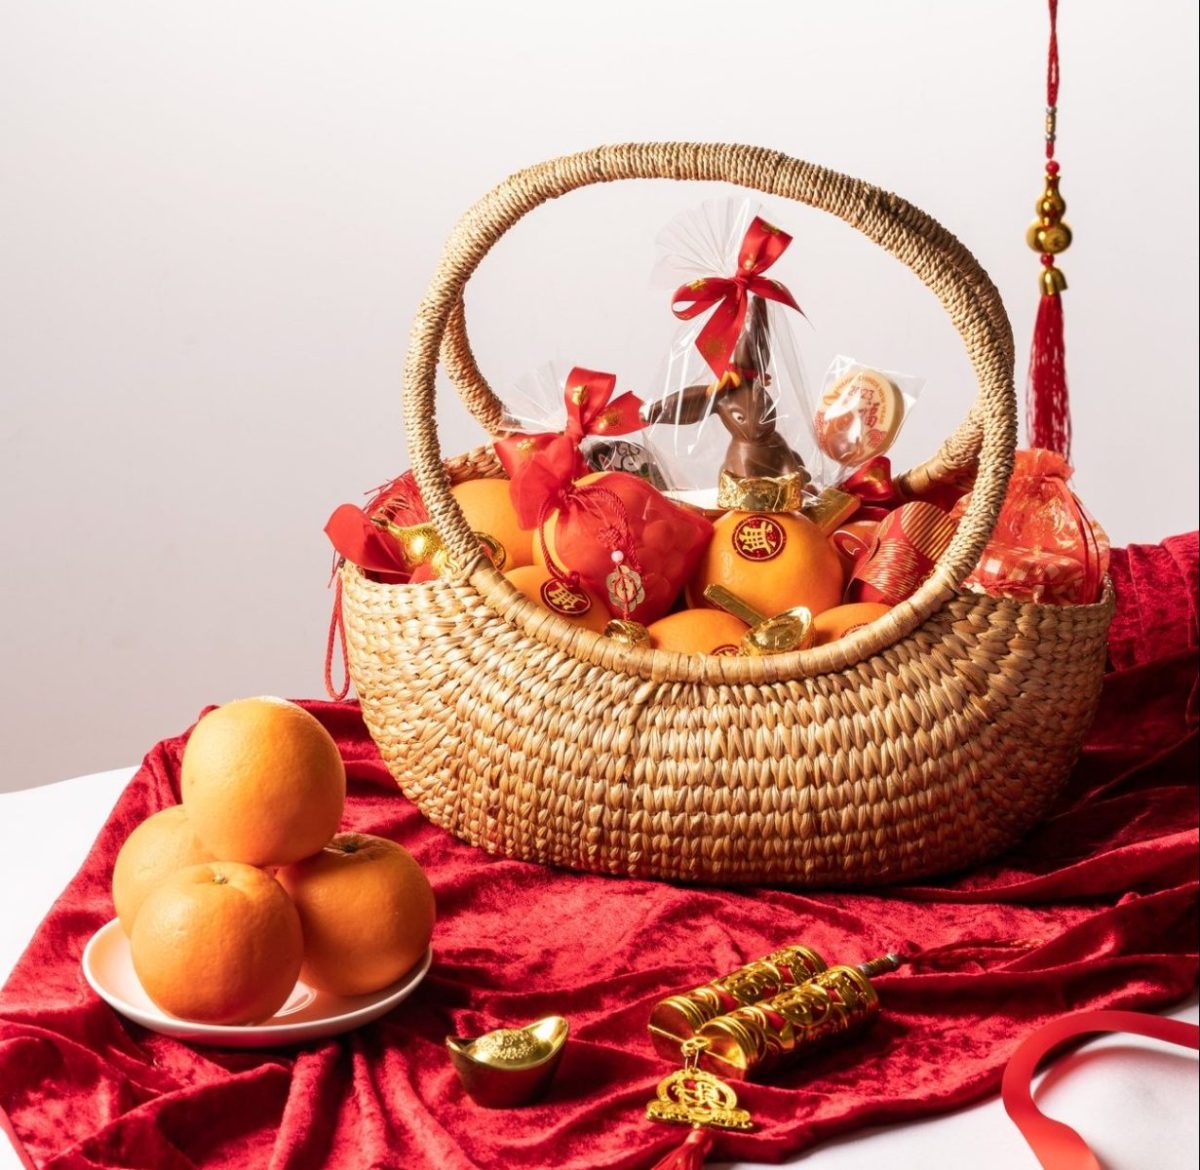 Anantara Siam Bangkok Hotel Keeps Things Sweet this Lunar New Year with Festive Hampers and Limited-Edition